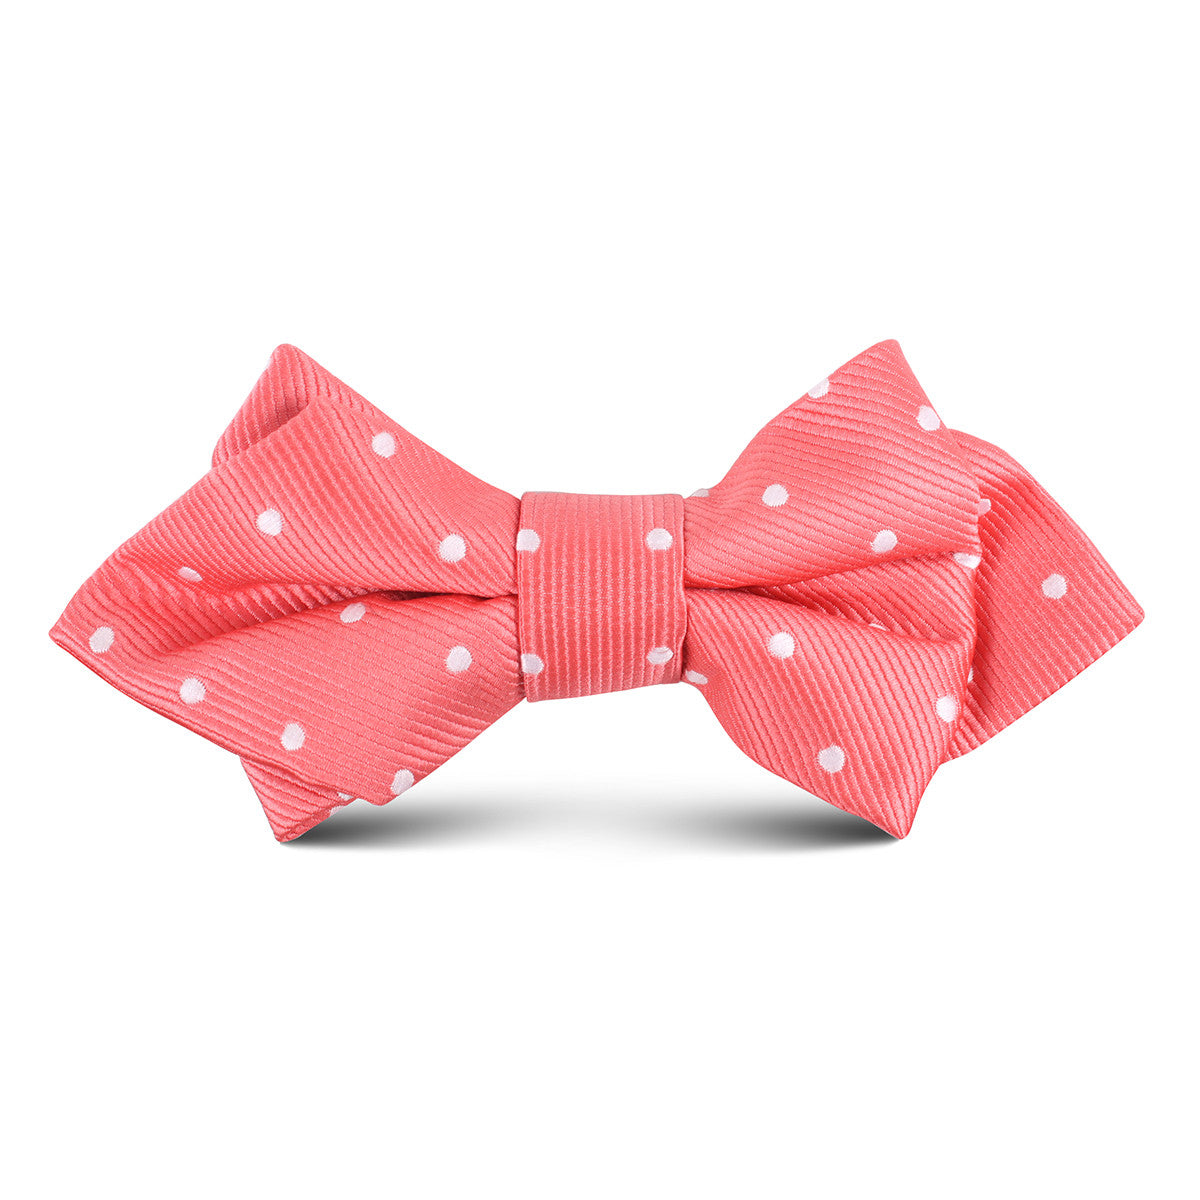 Coral Pink with White Polka Dots Kids Diamond Bow Tie